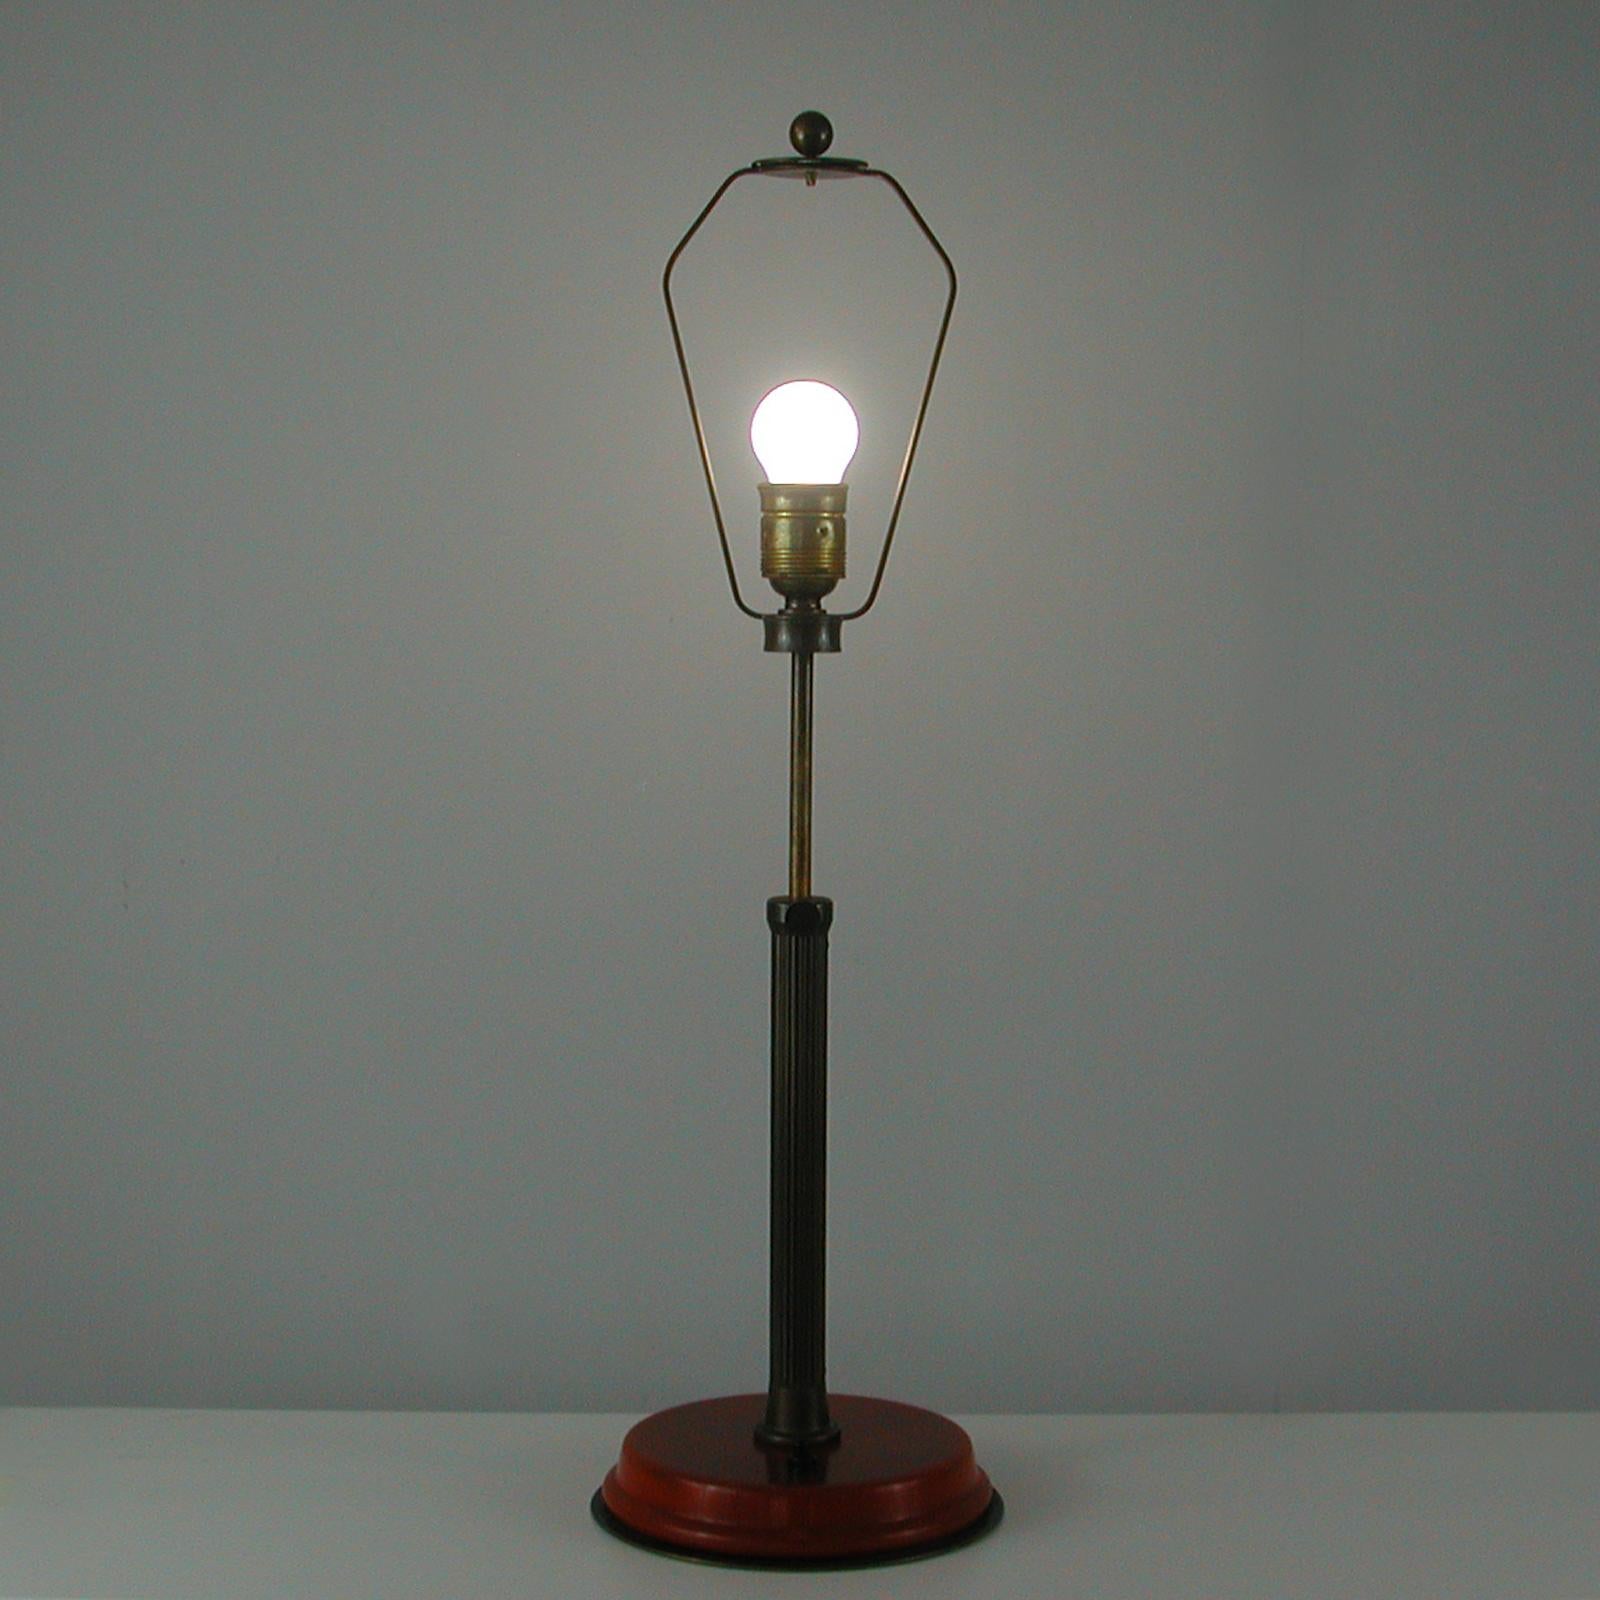 Mid-20th Century German Art Deco Height Adjustable Bronzed Brass and Bakelite Table Lamp, 1930s For Sale